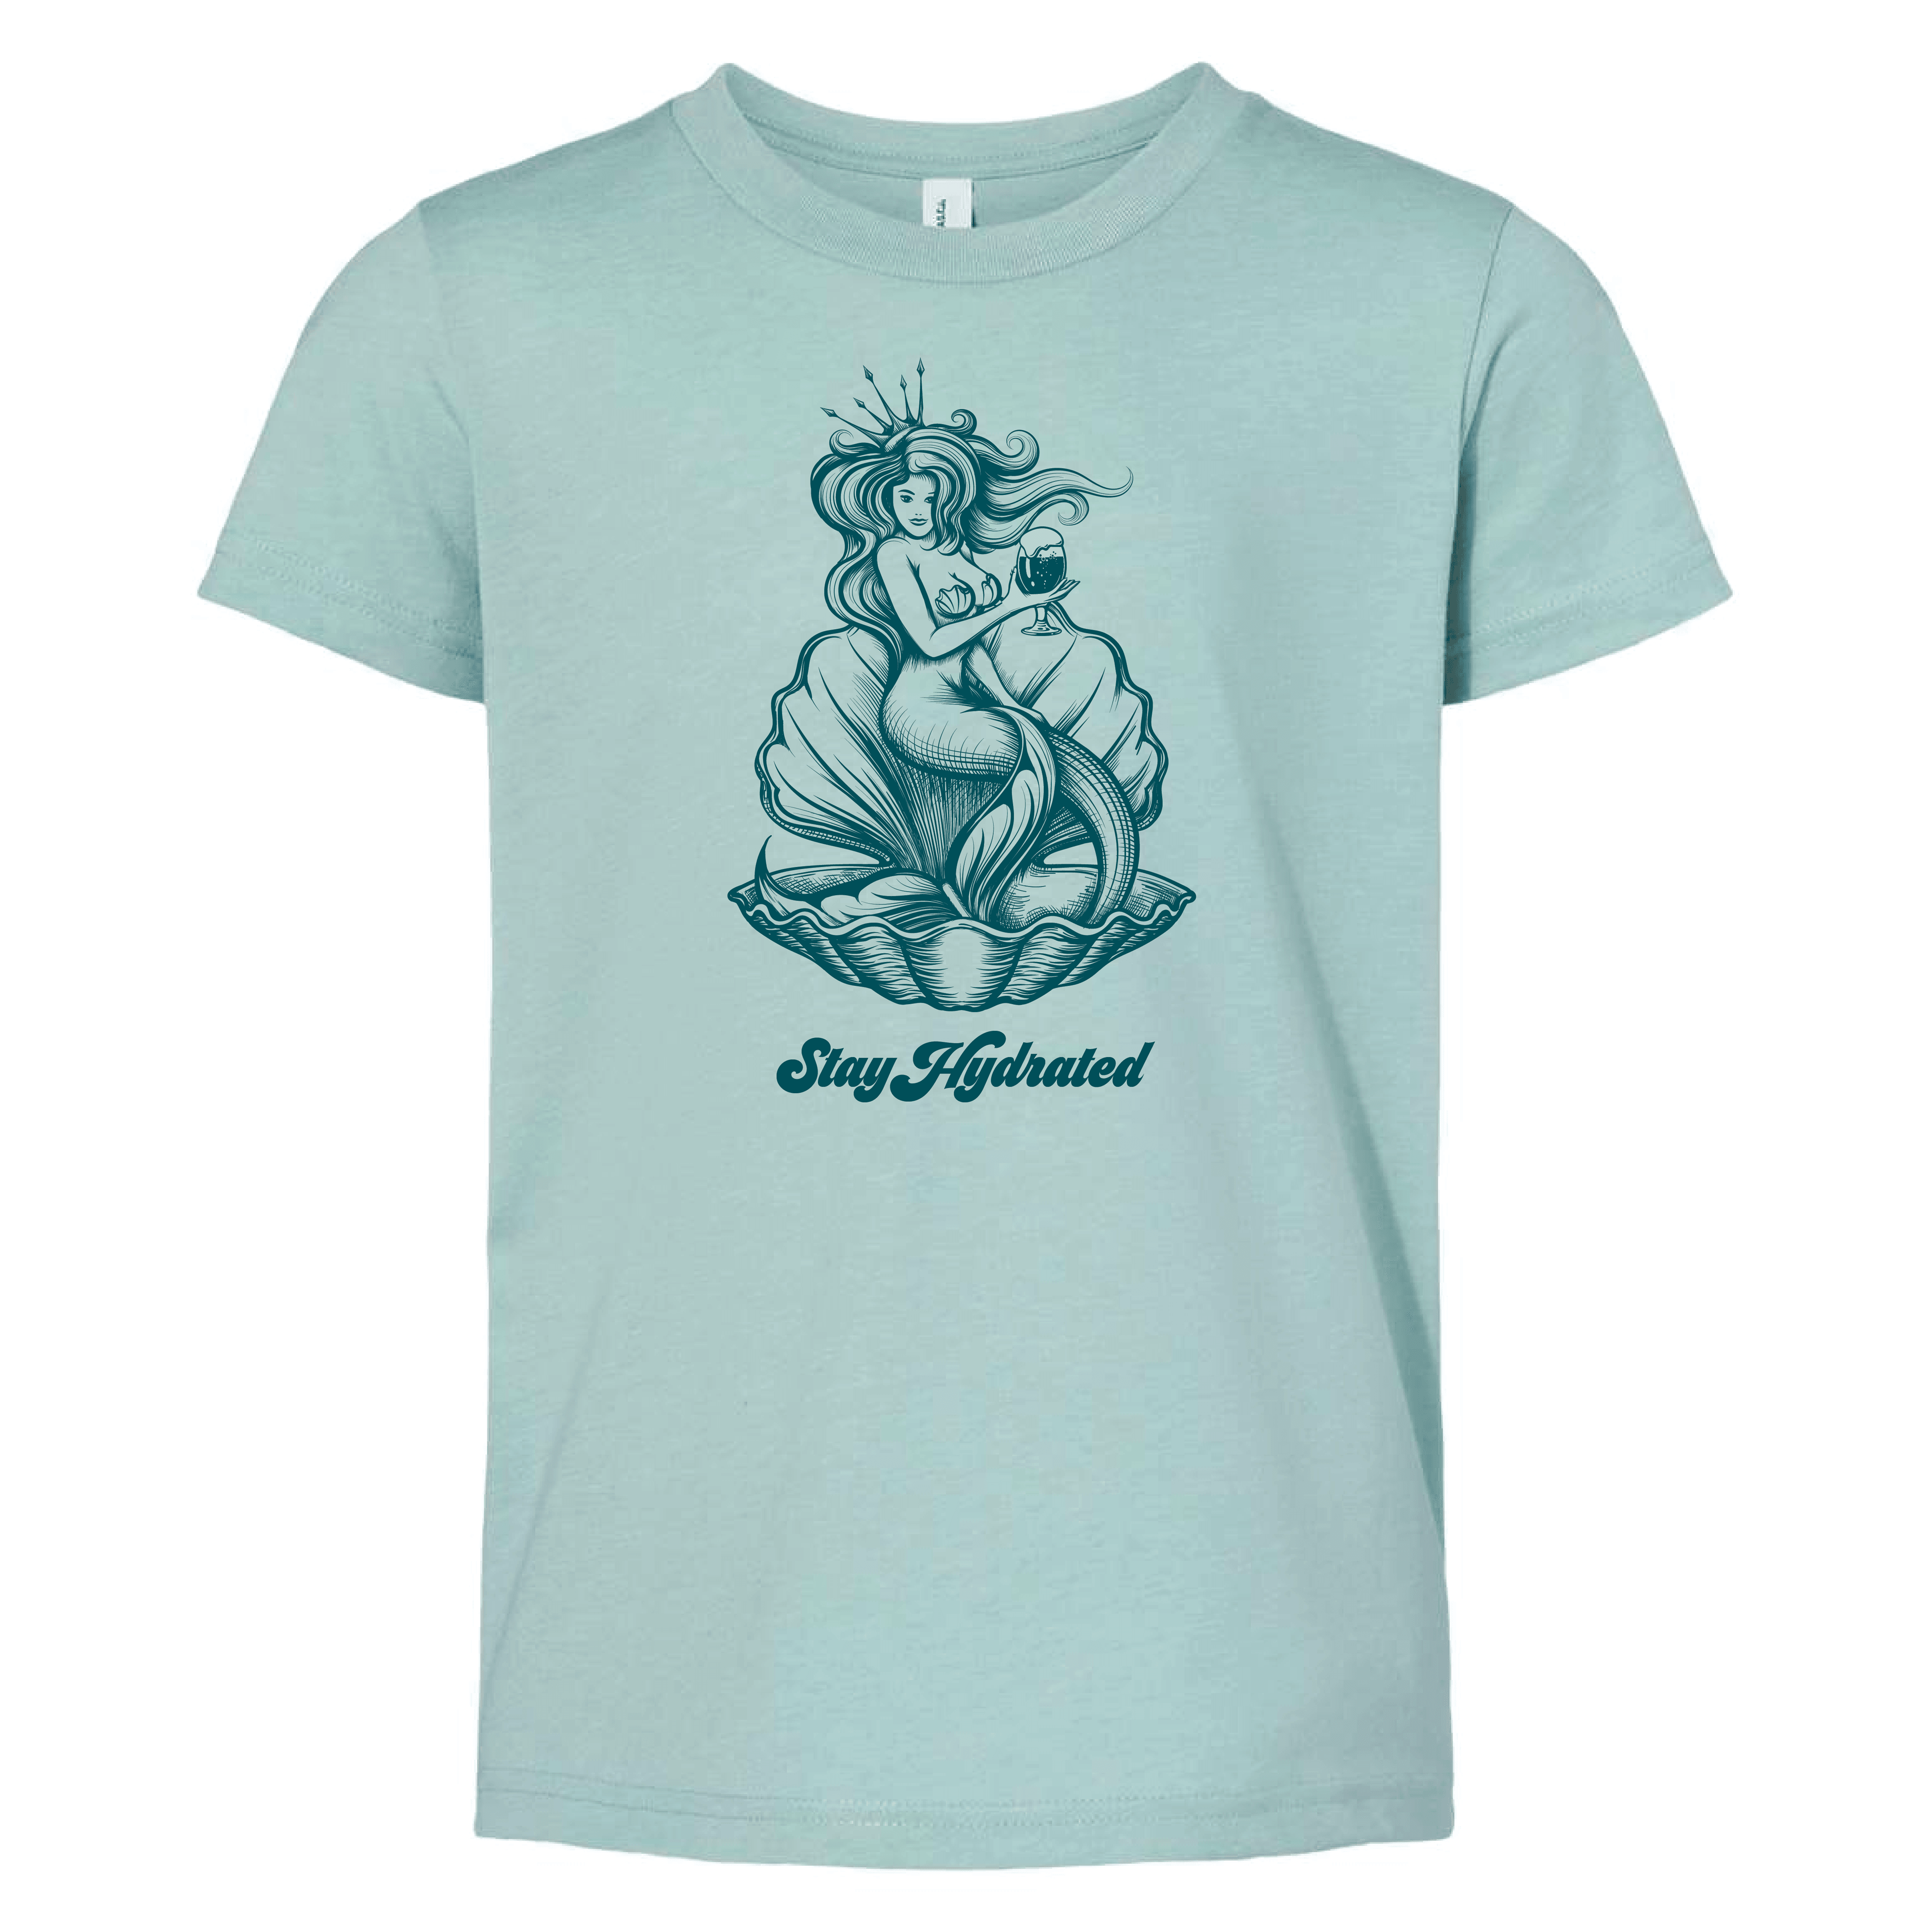 Stay Hydrated T-Shirt - Ales to Trails